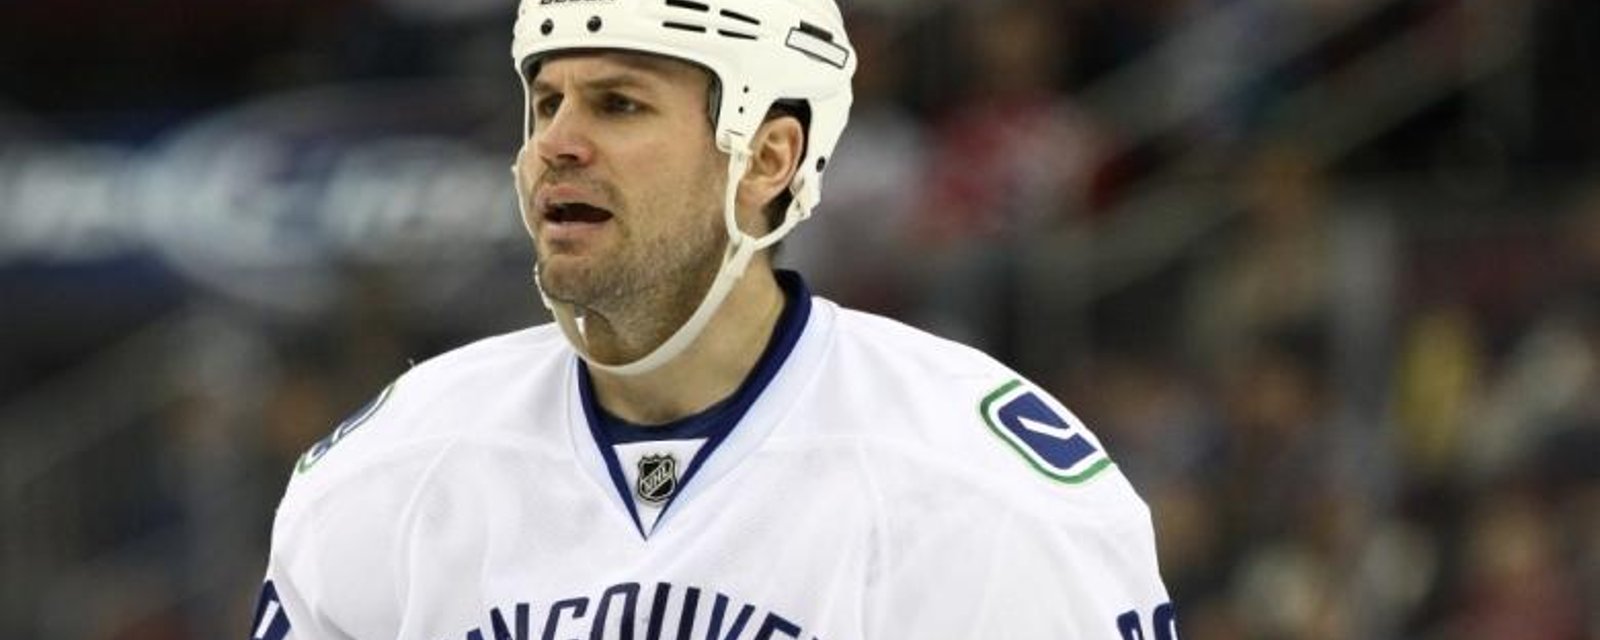 Former player is now suing the NHL after career-ending injury.